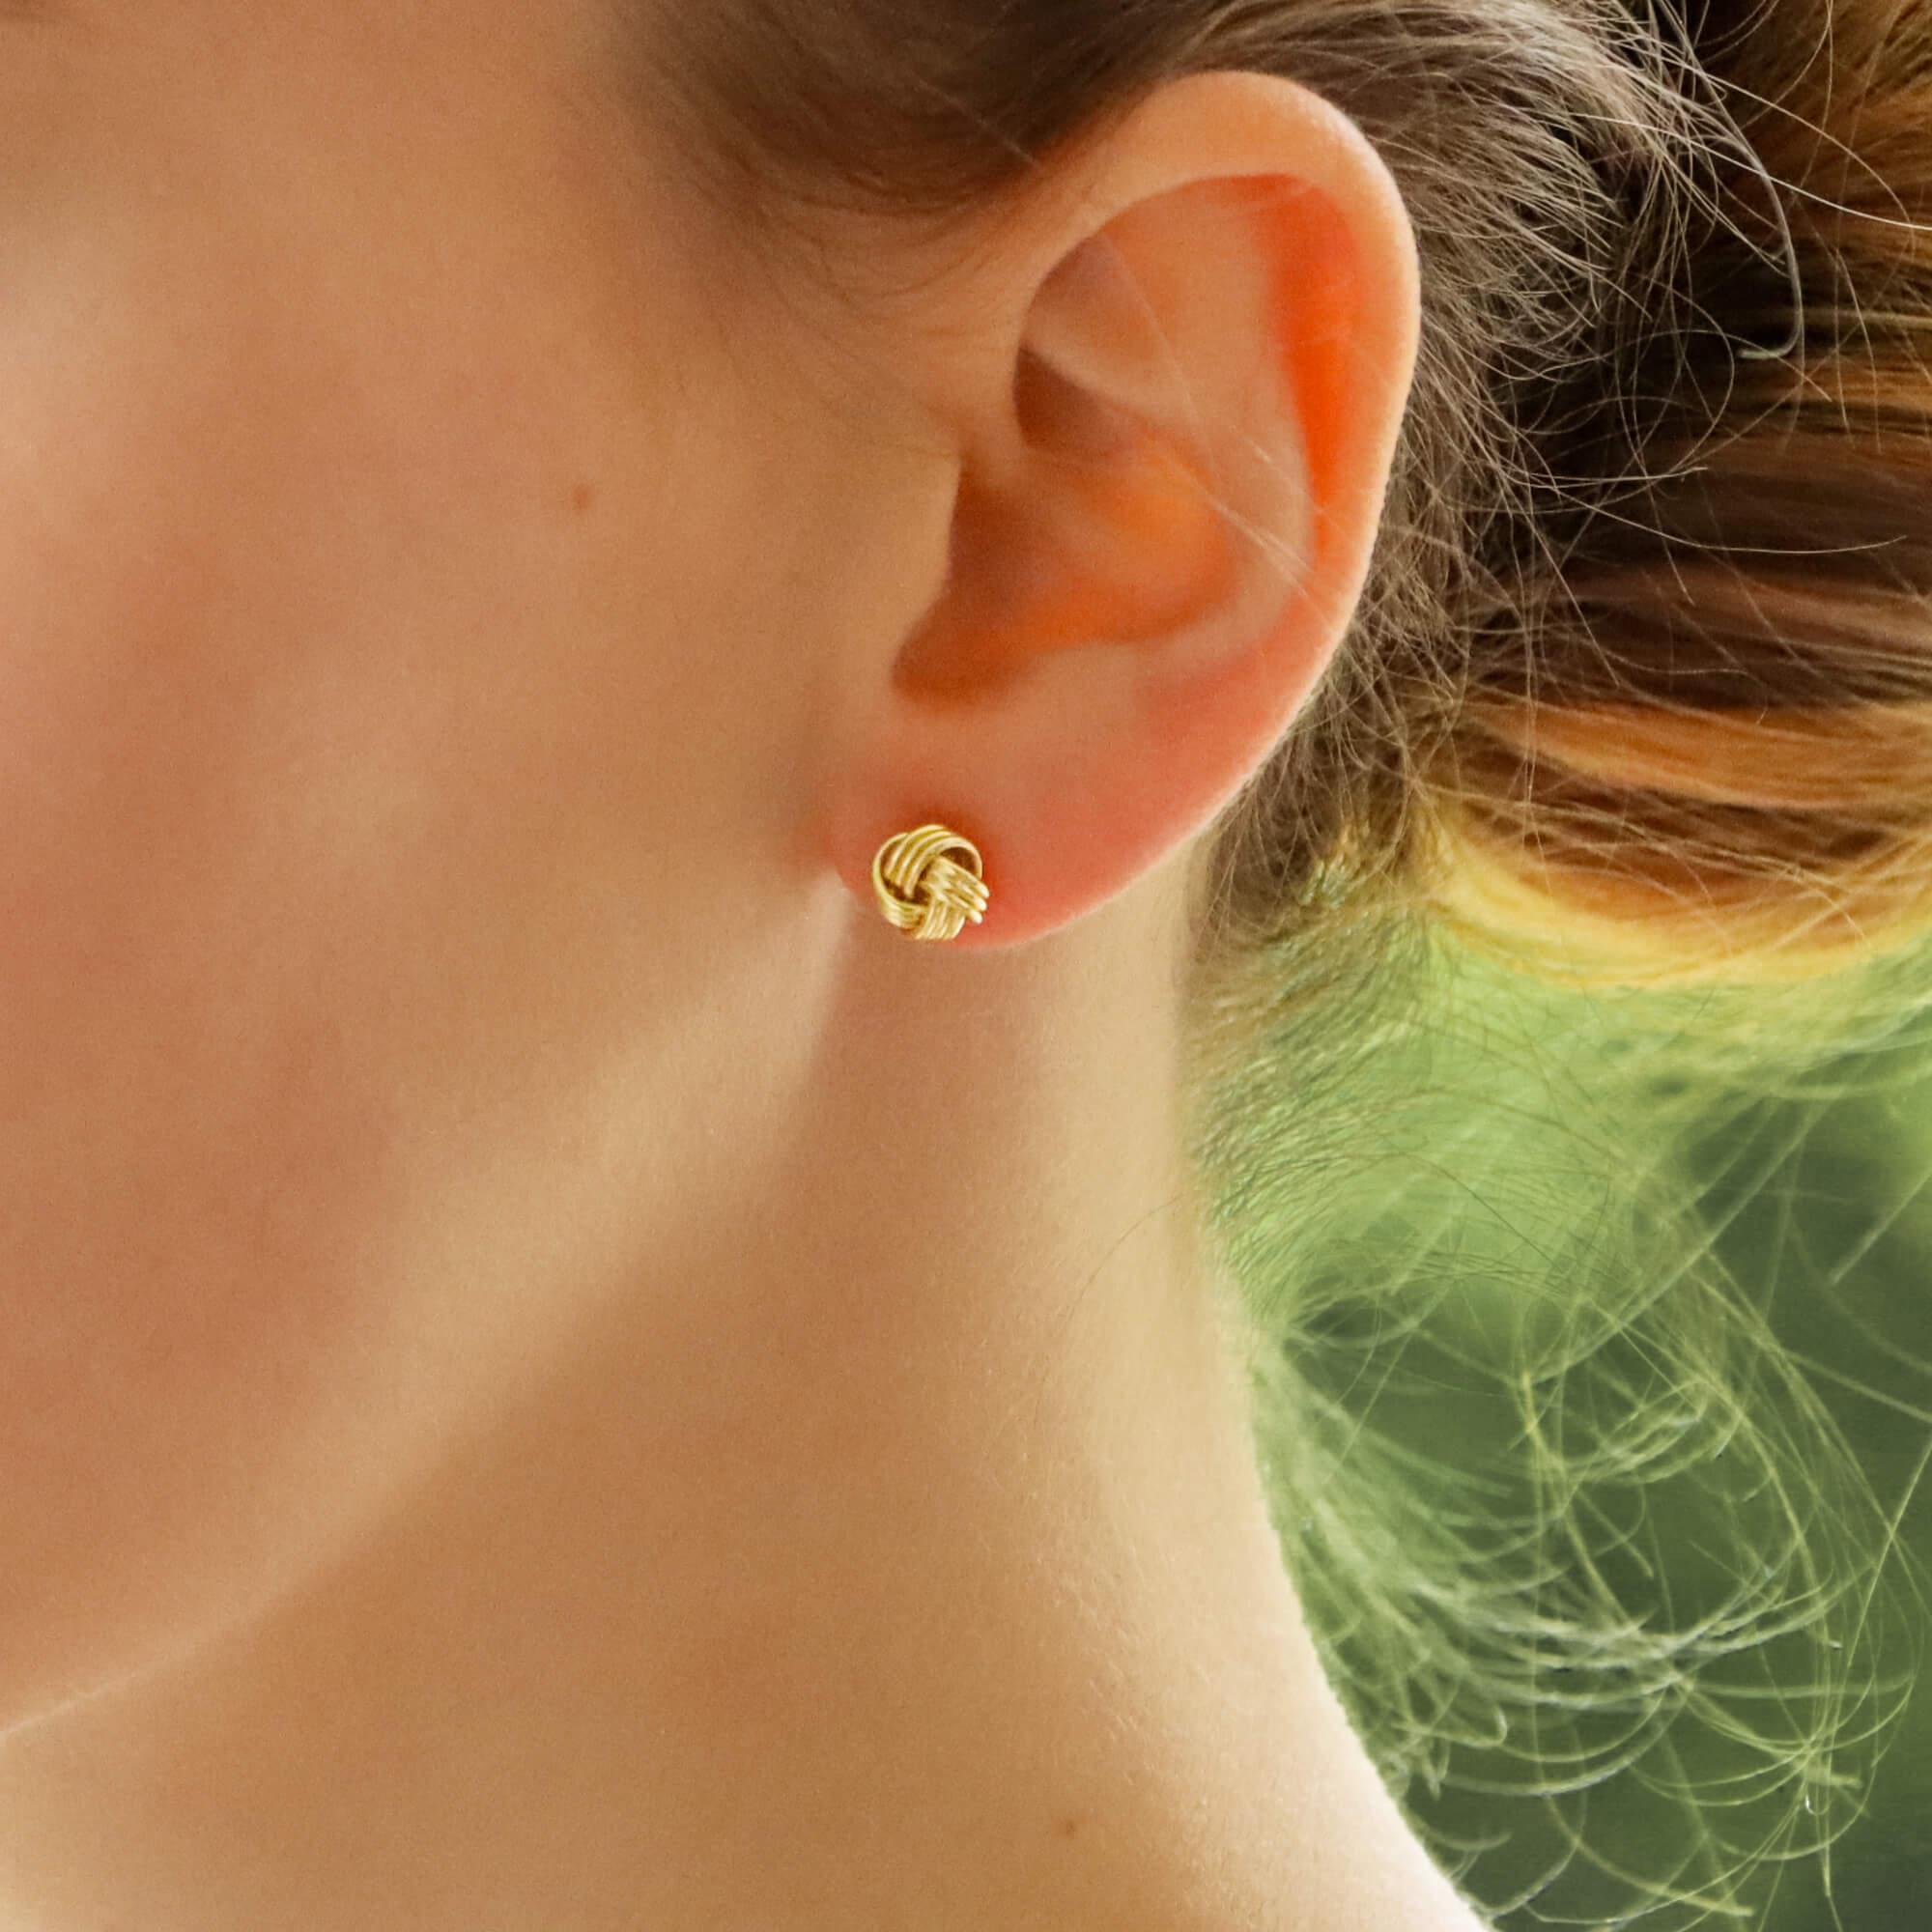 An elegant pair of knot stud earrings in 18k yellow gold. These beautifully hand crafted earrings consist of 3 strands of yellow gold woven into a simple knot.

Due to the design and size, these earrings would make a perfect everyday pair of studs.